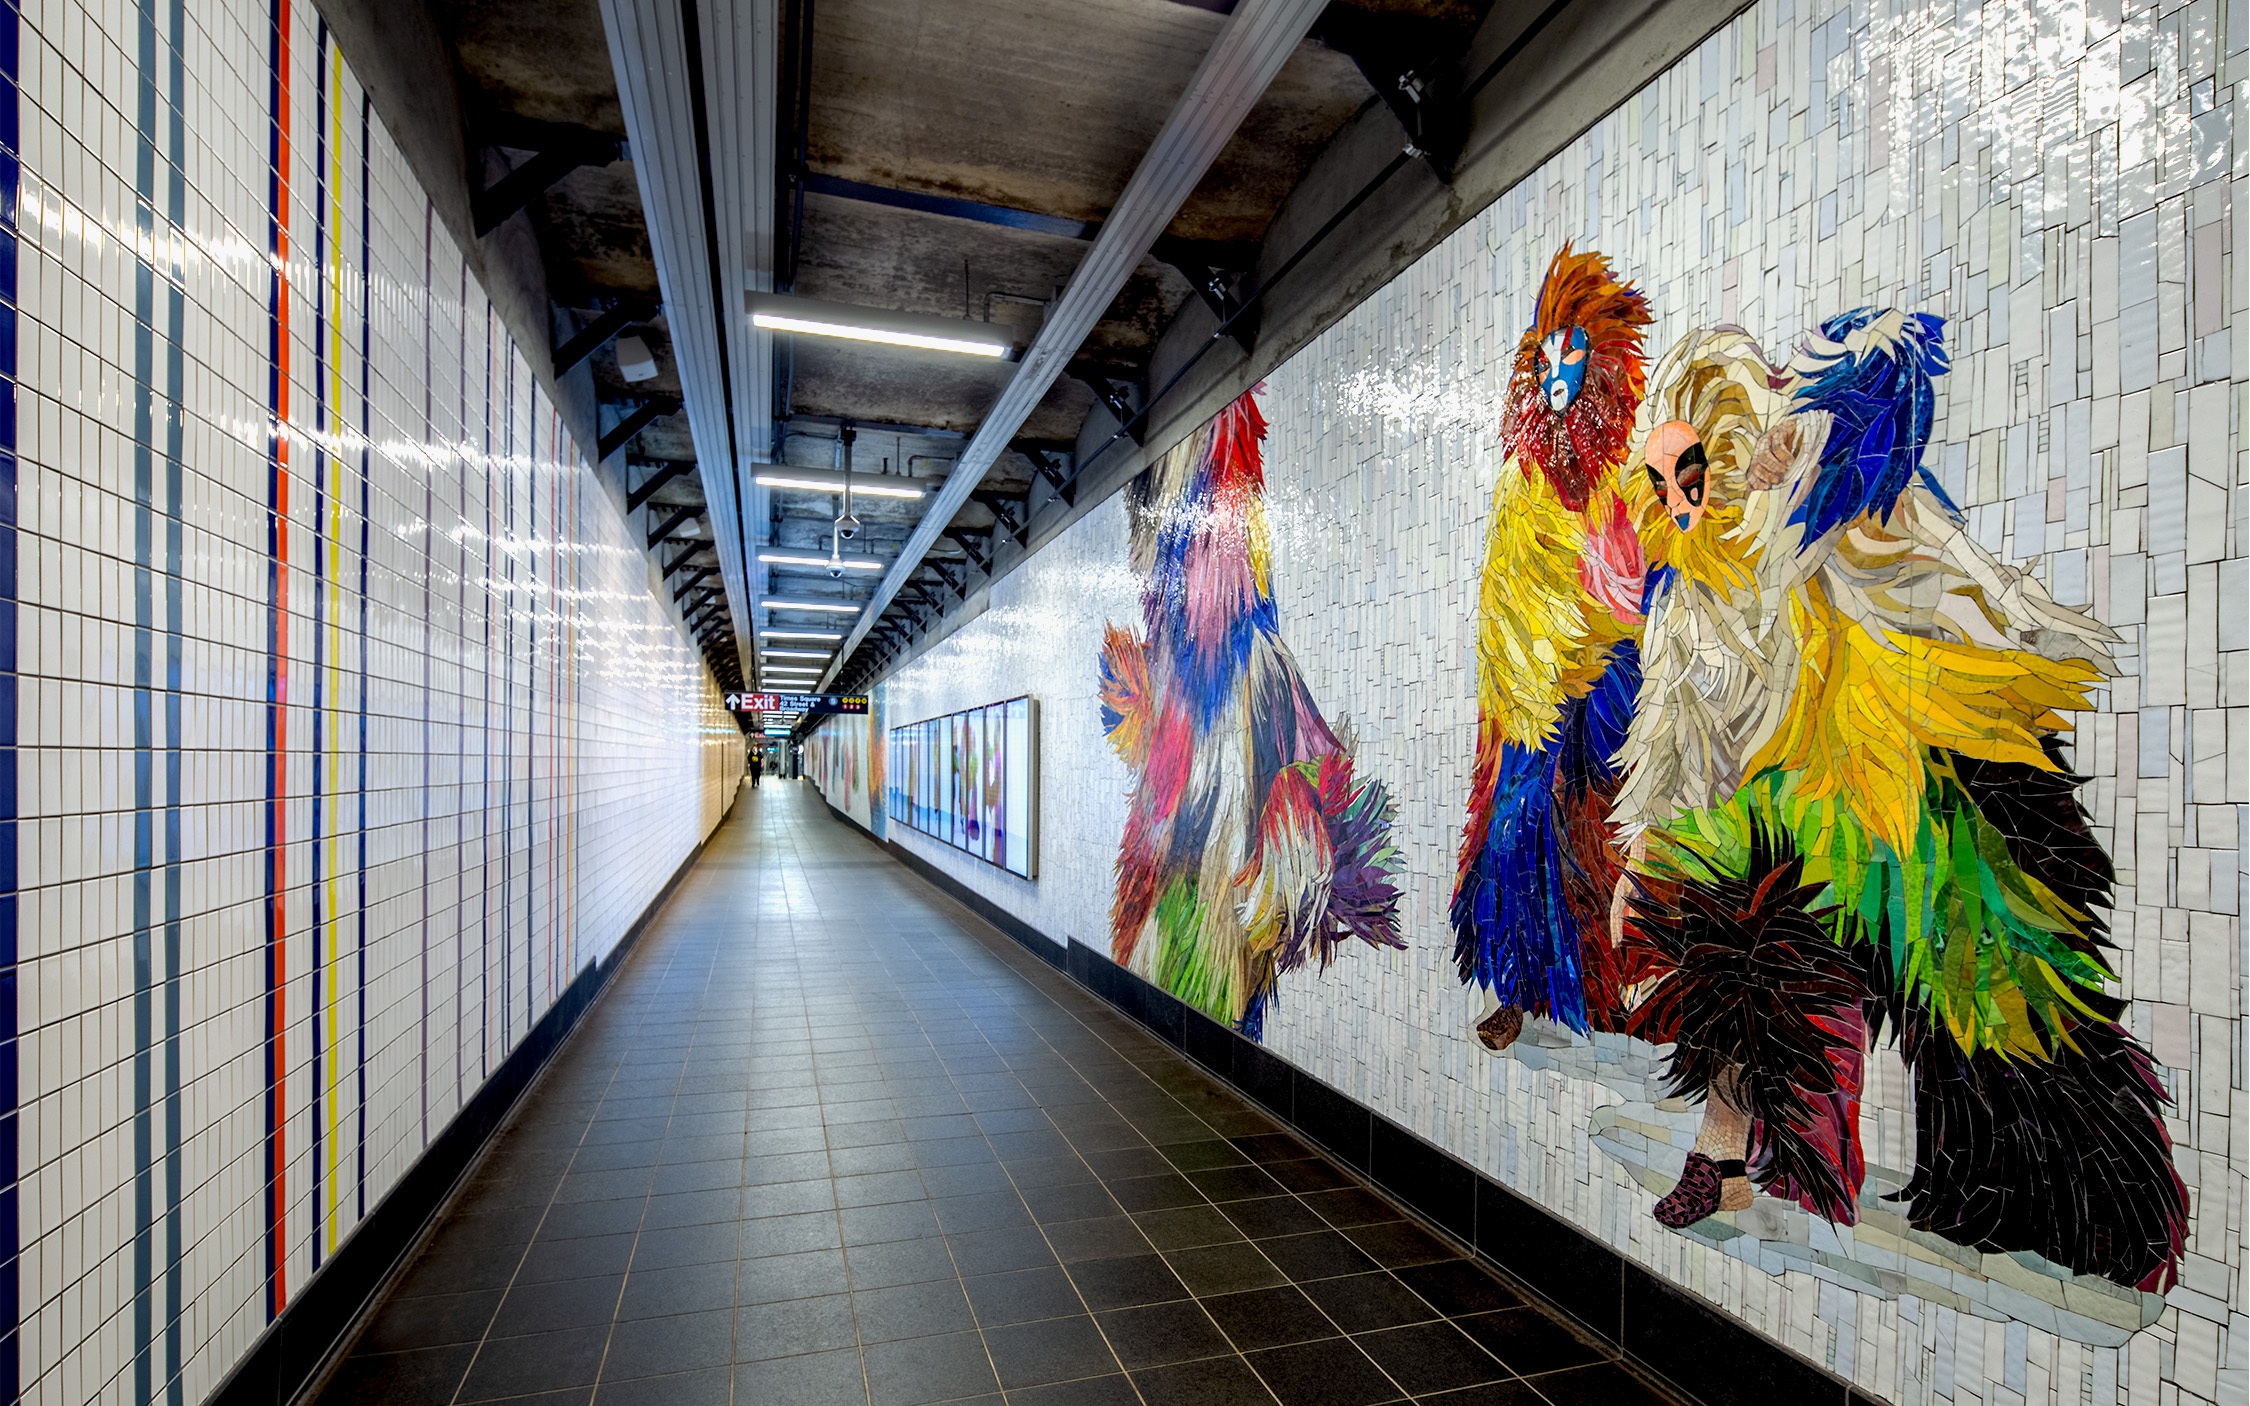 42nd Street Connector with Nick cave mosaic